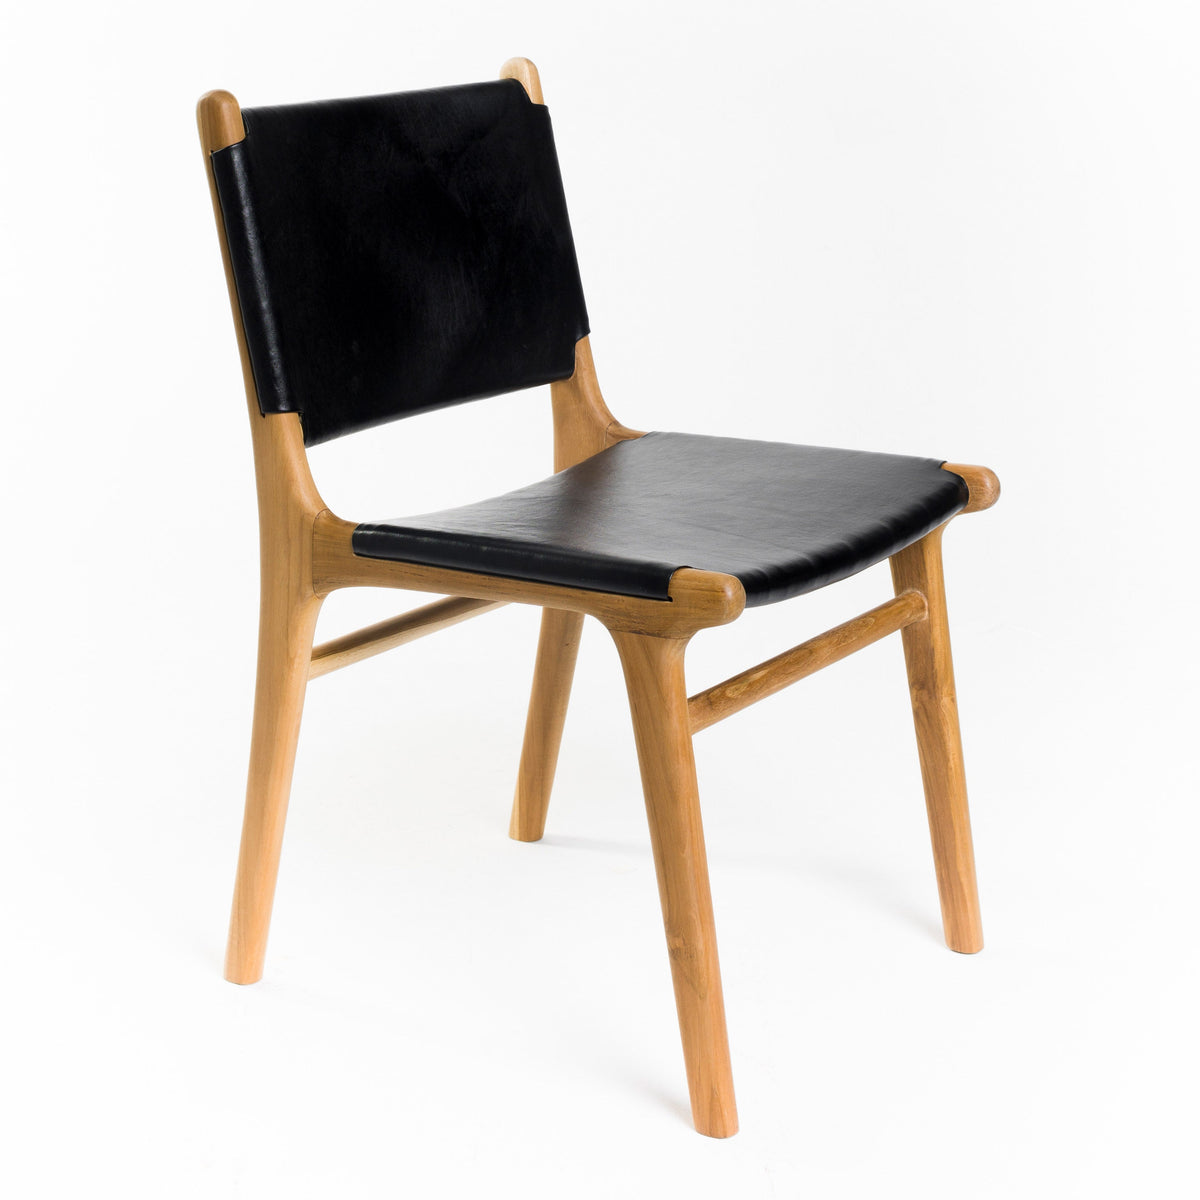 Clearance - Spensley Dining Chair - Black